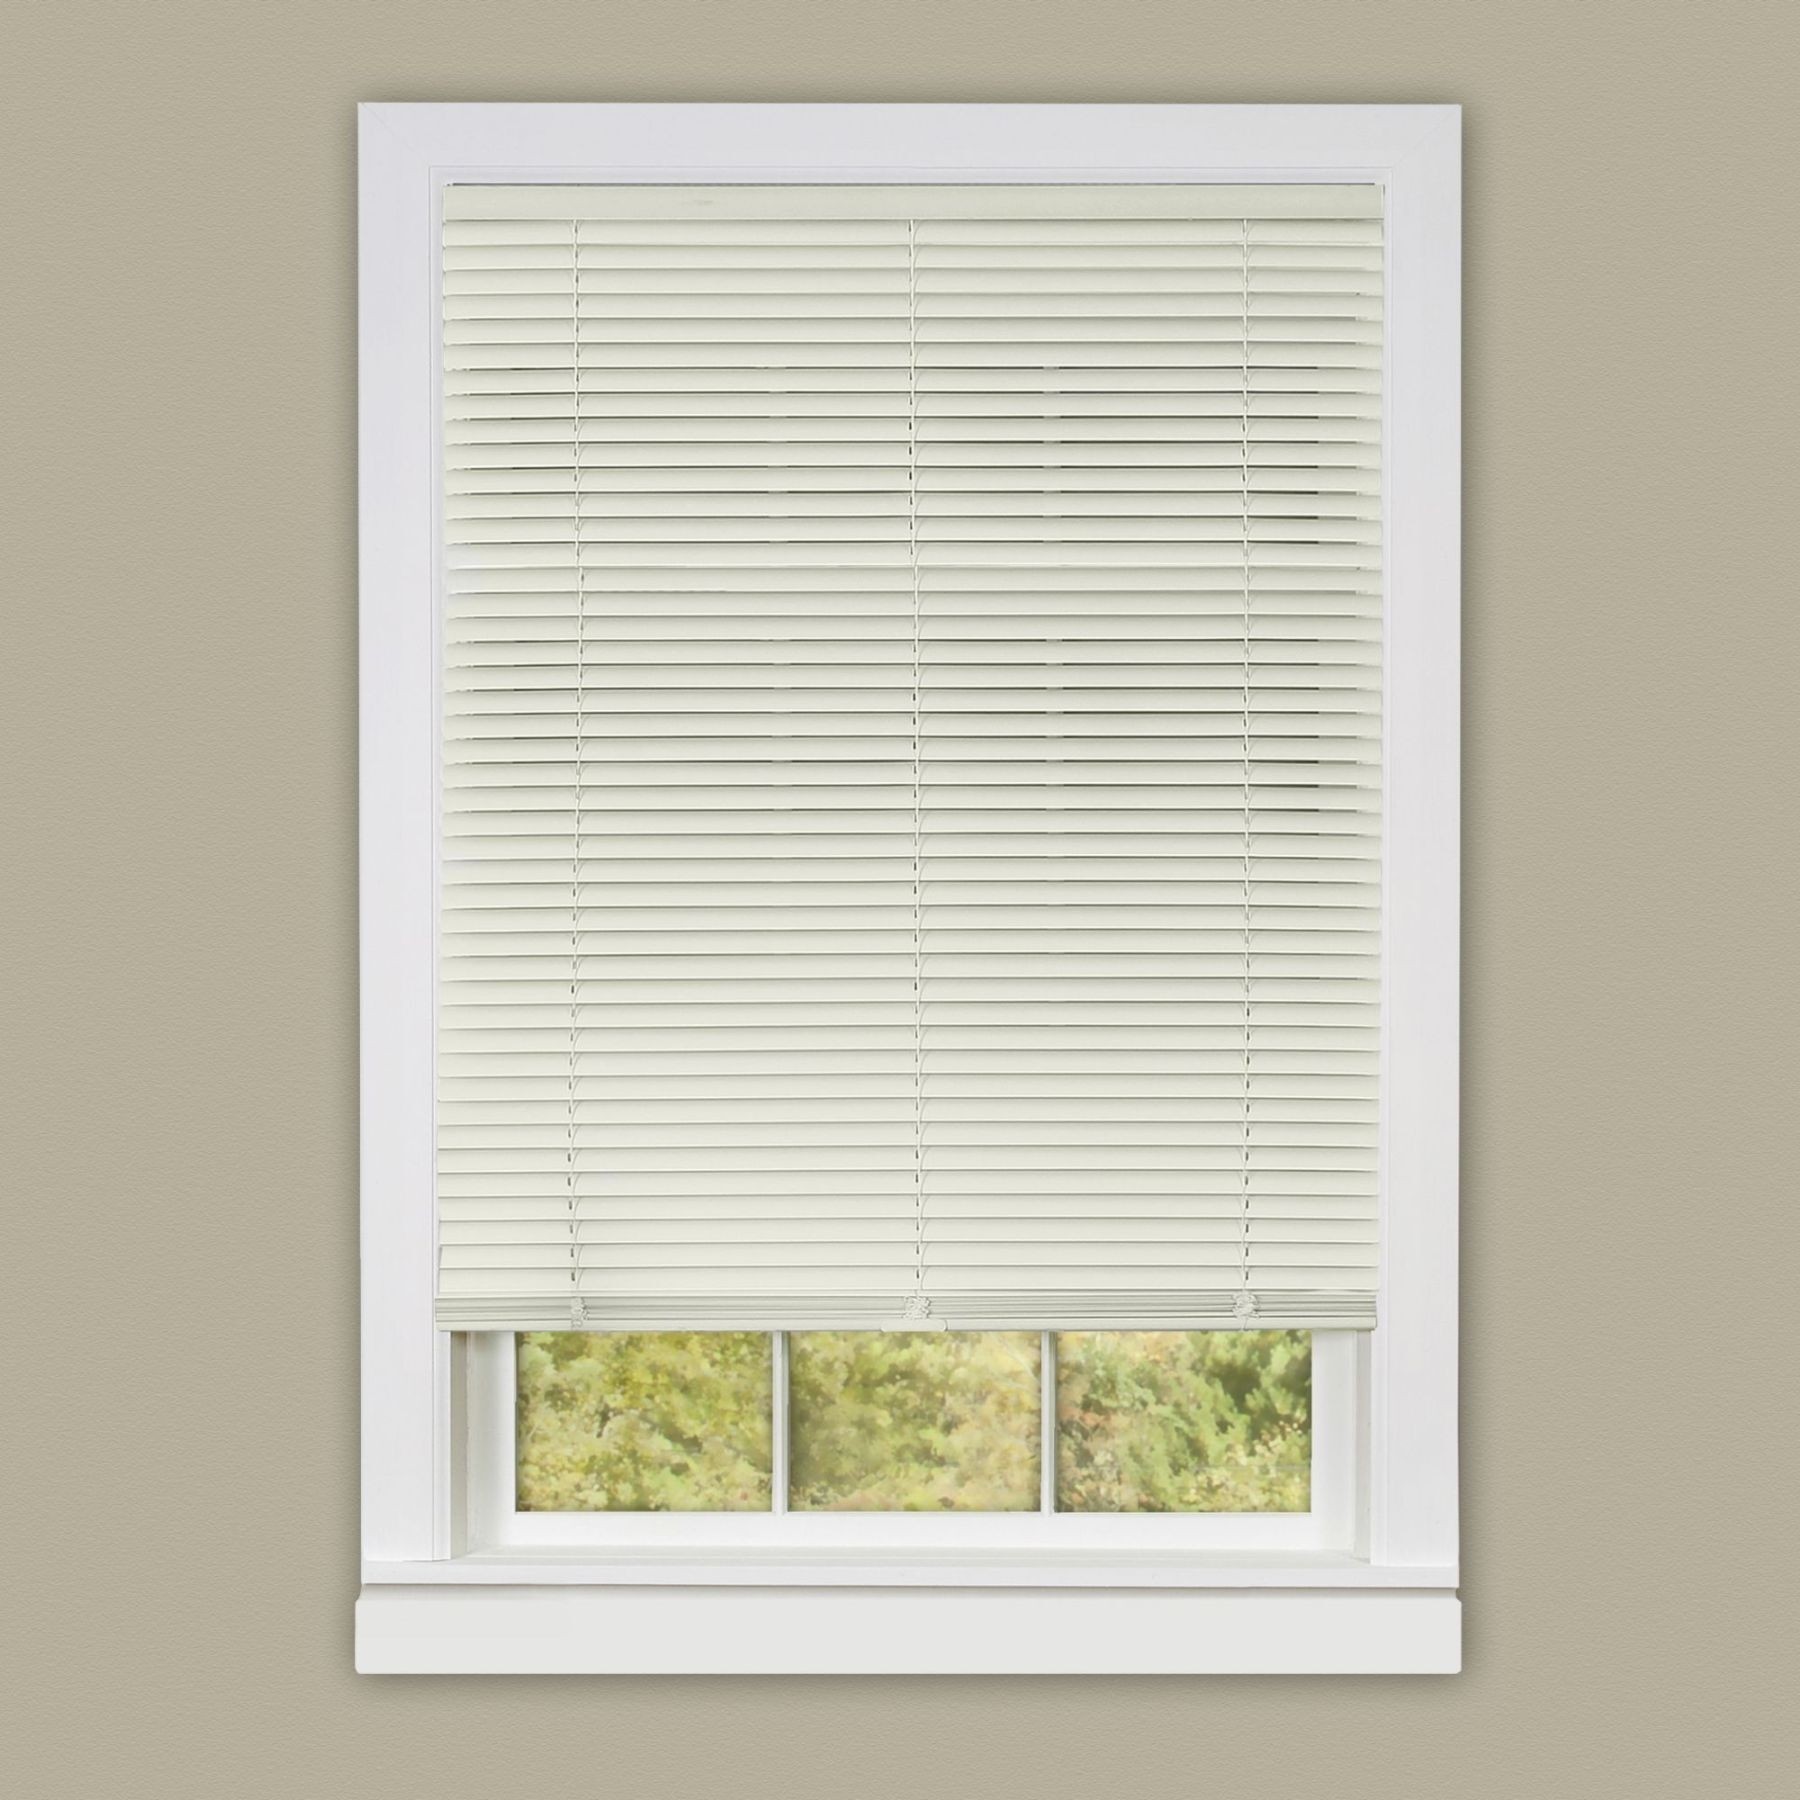 How To Choose Blinds And Shades - Foter